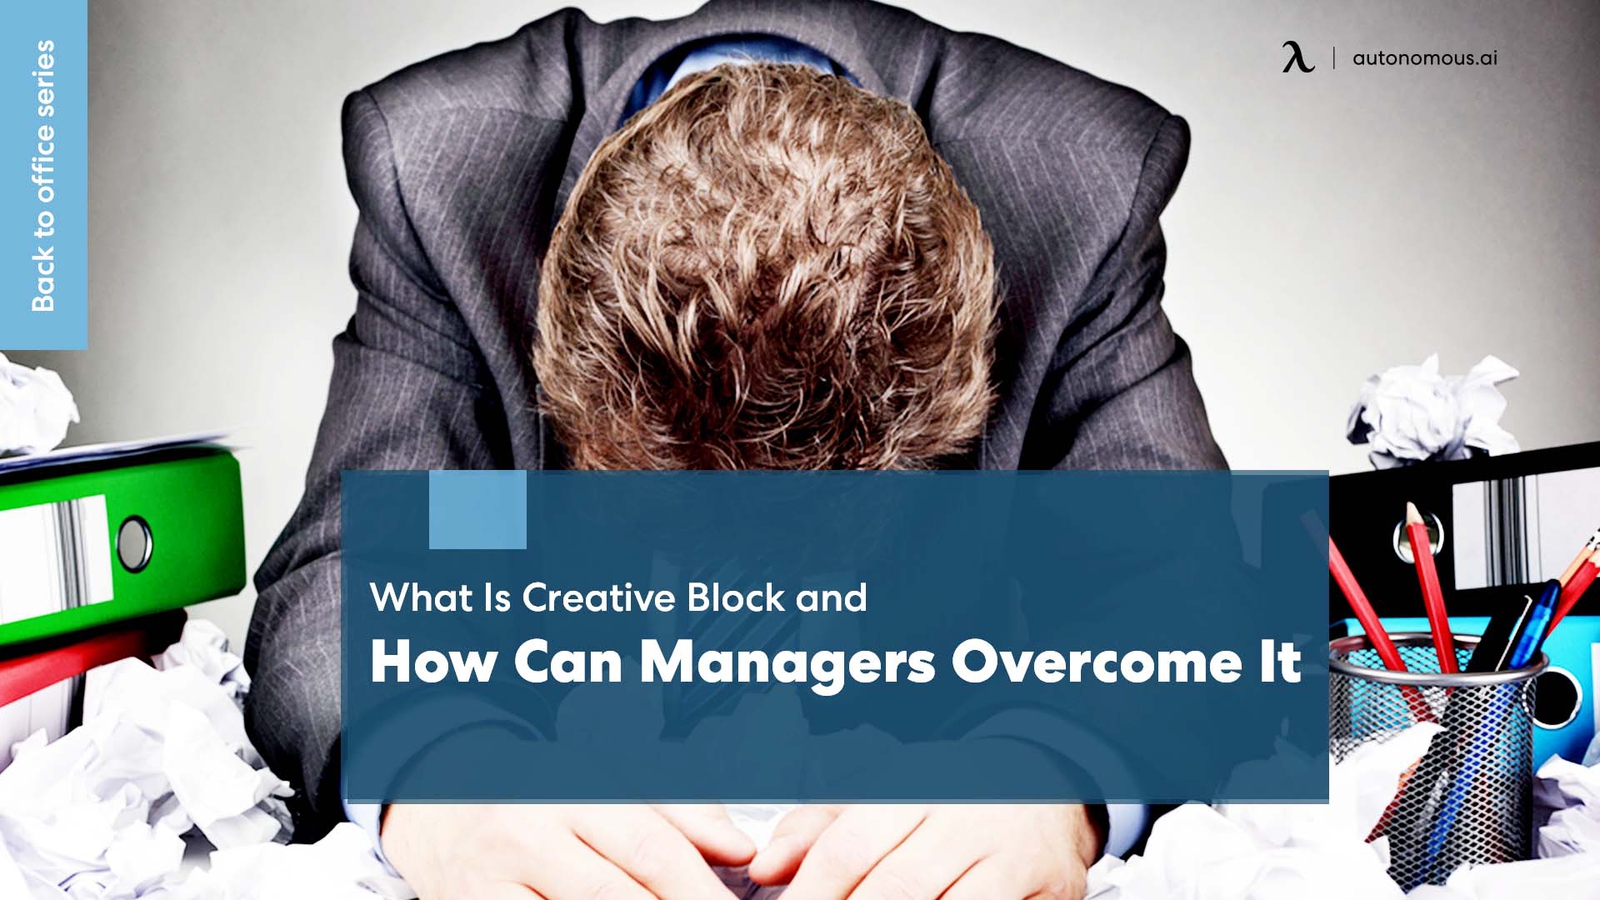 What Is Creative Block and How Can Managers Overcome It?